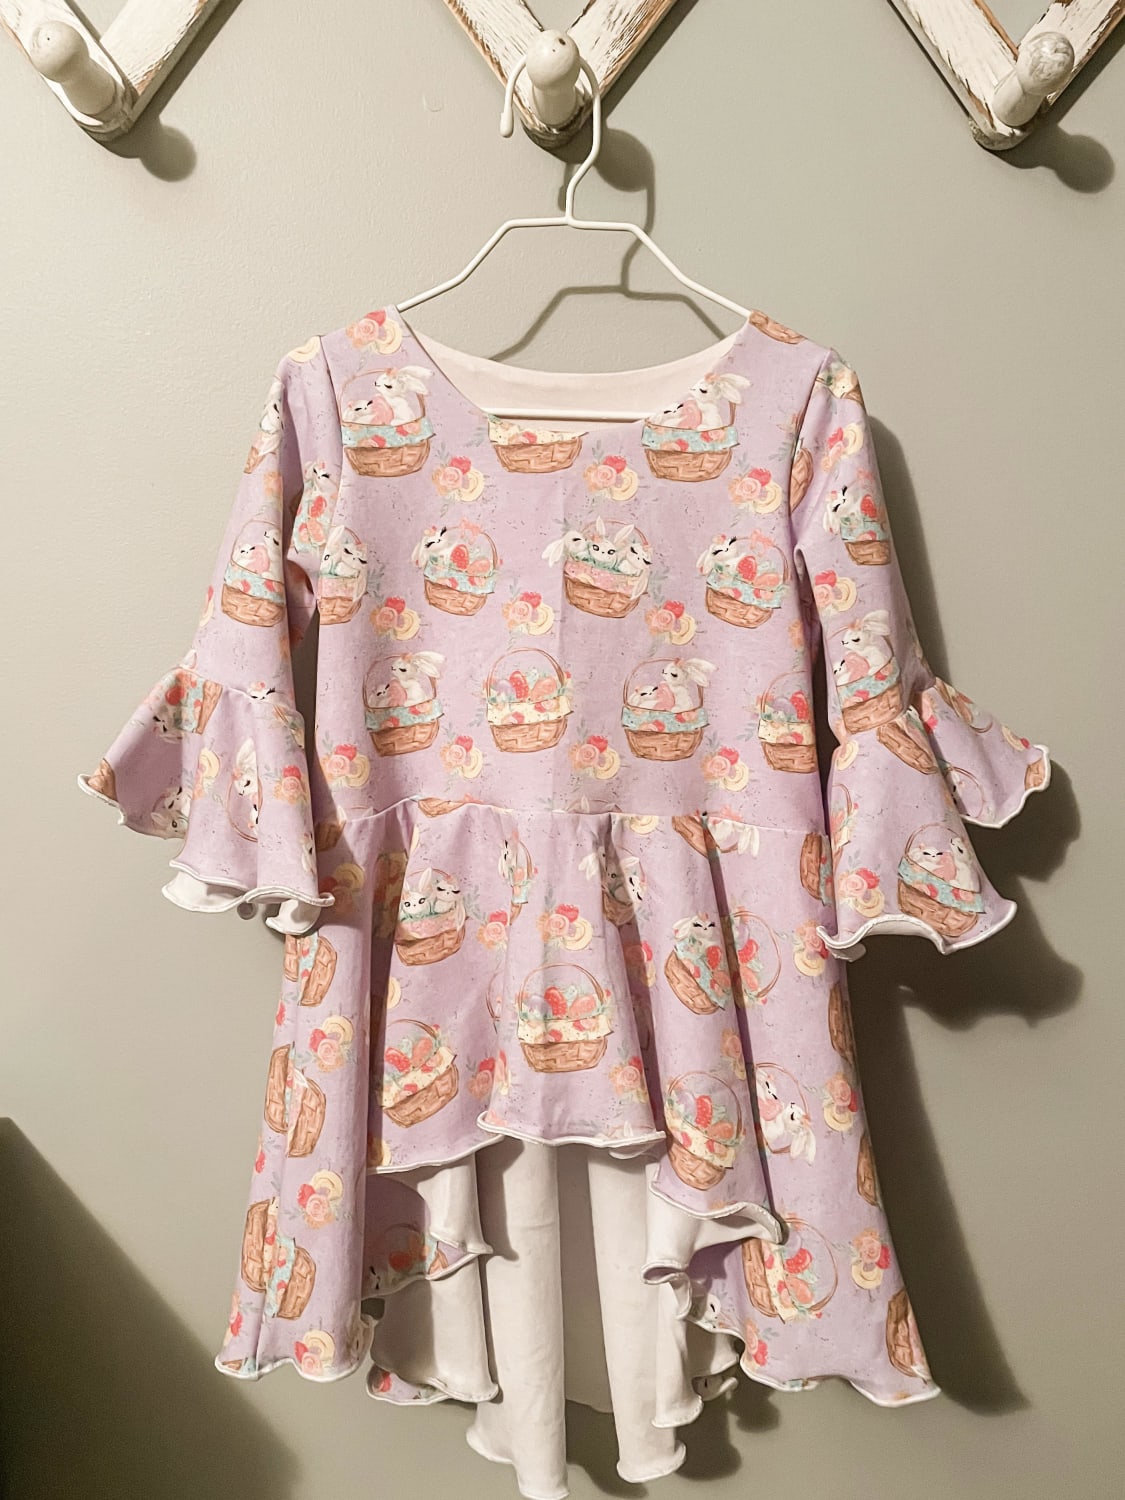 I haven’t done much sewing recently but this weekend I decided to make my daughter an Easter shirt!